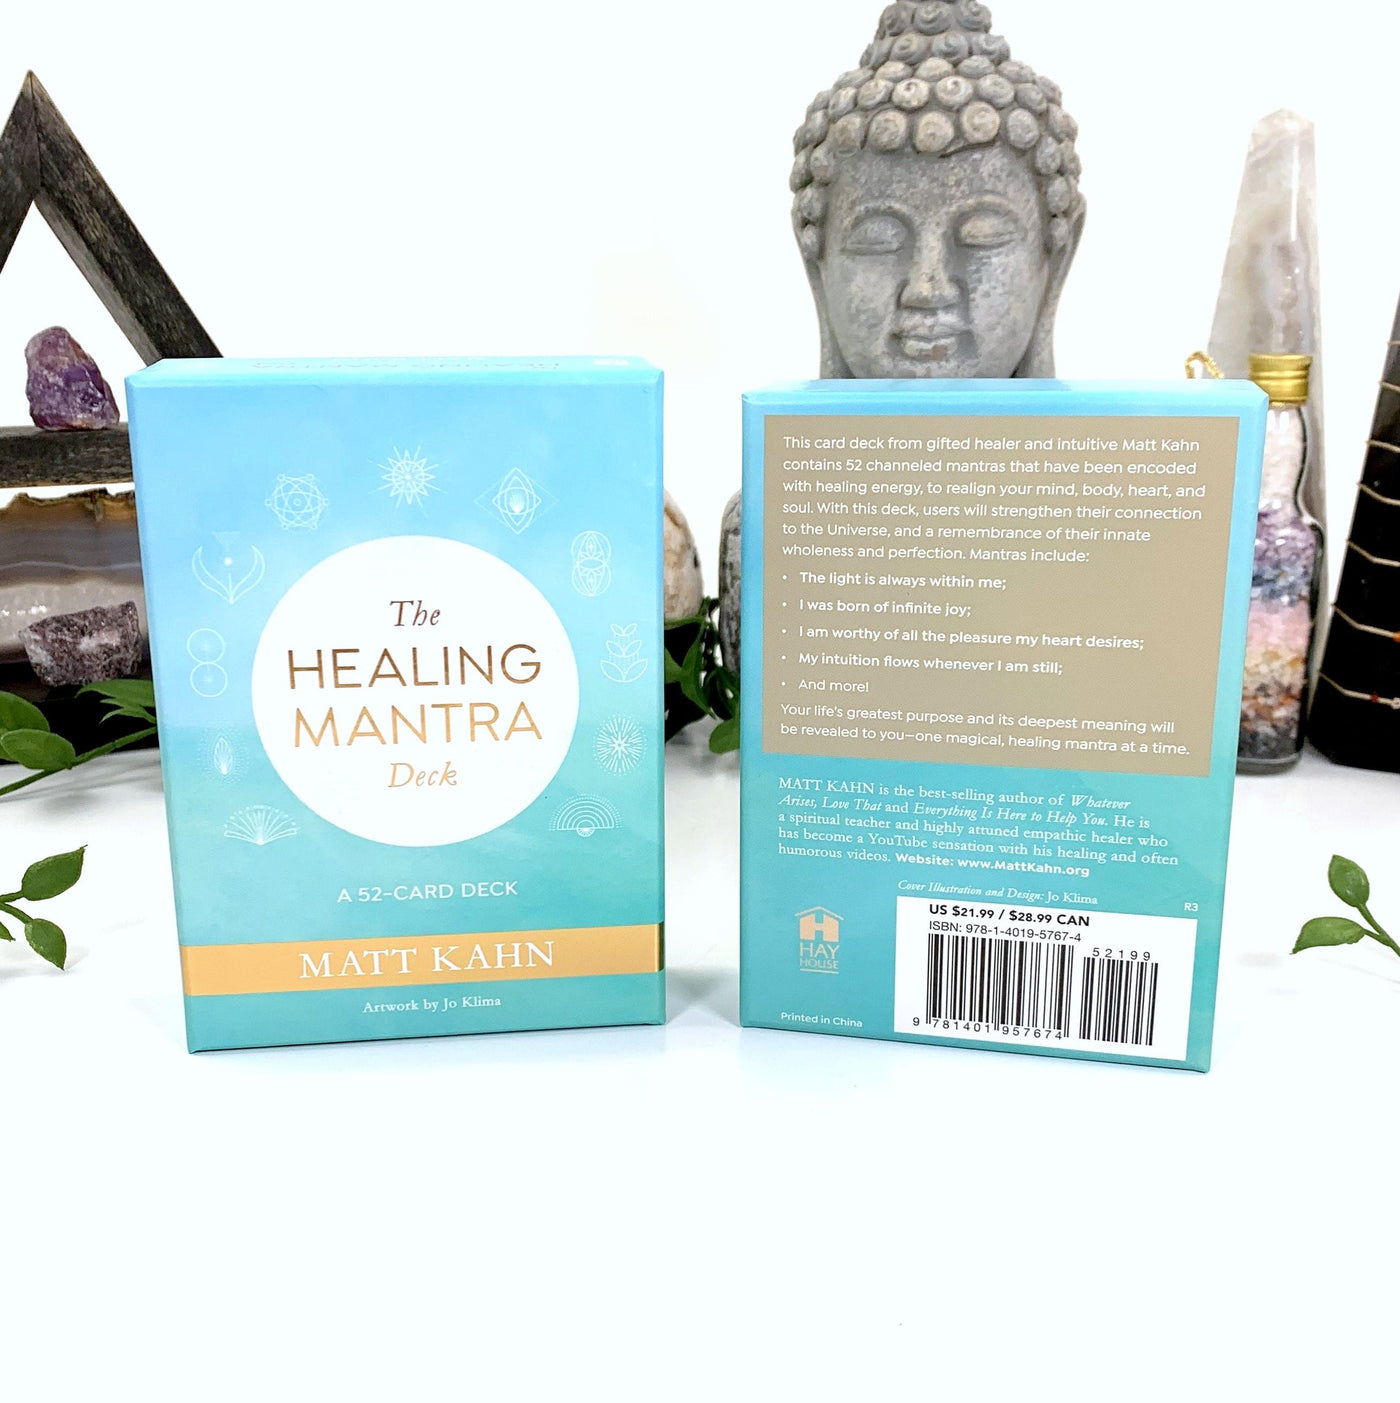 The front and back side of the  The Healing Mantra Deck  box